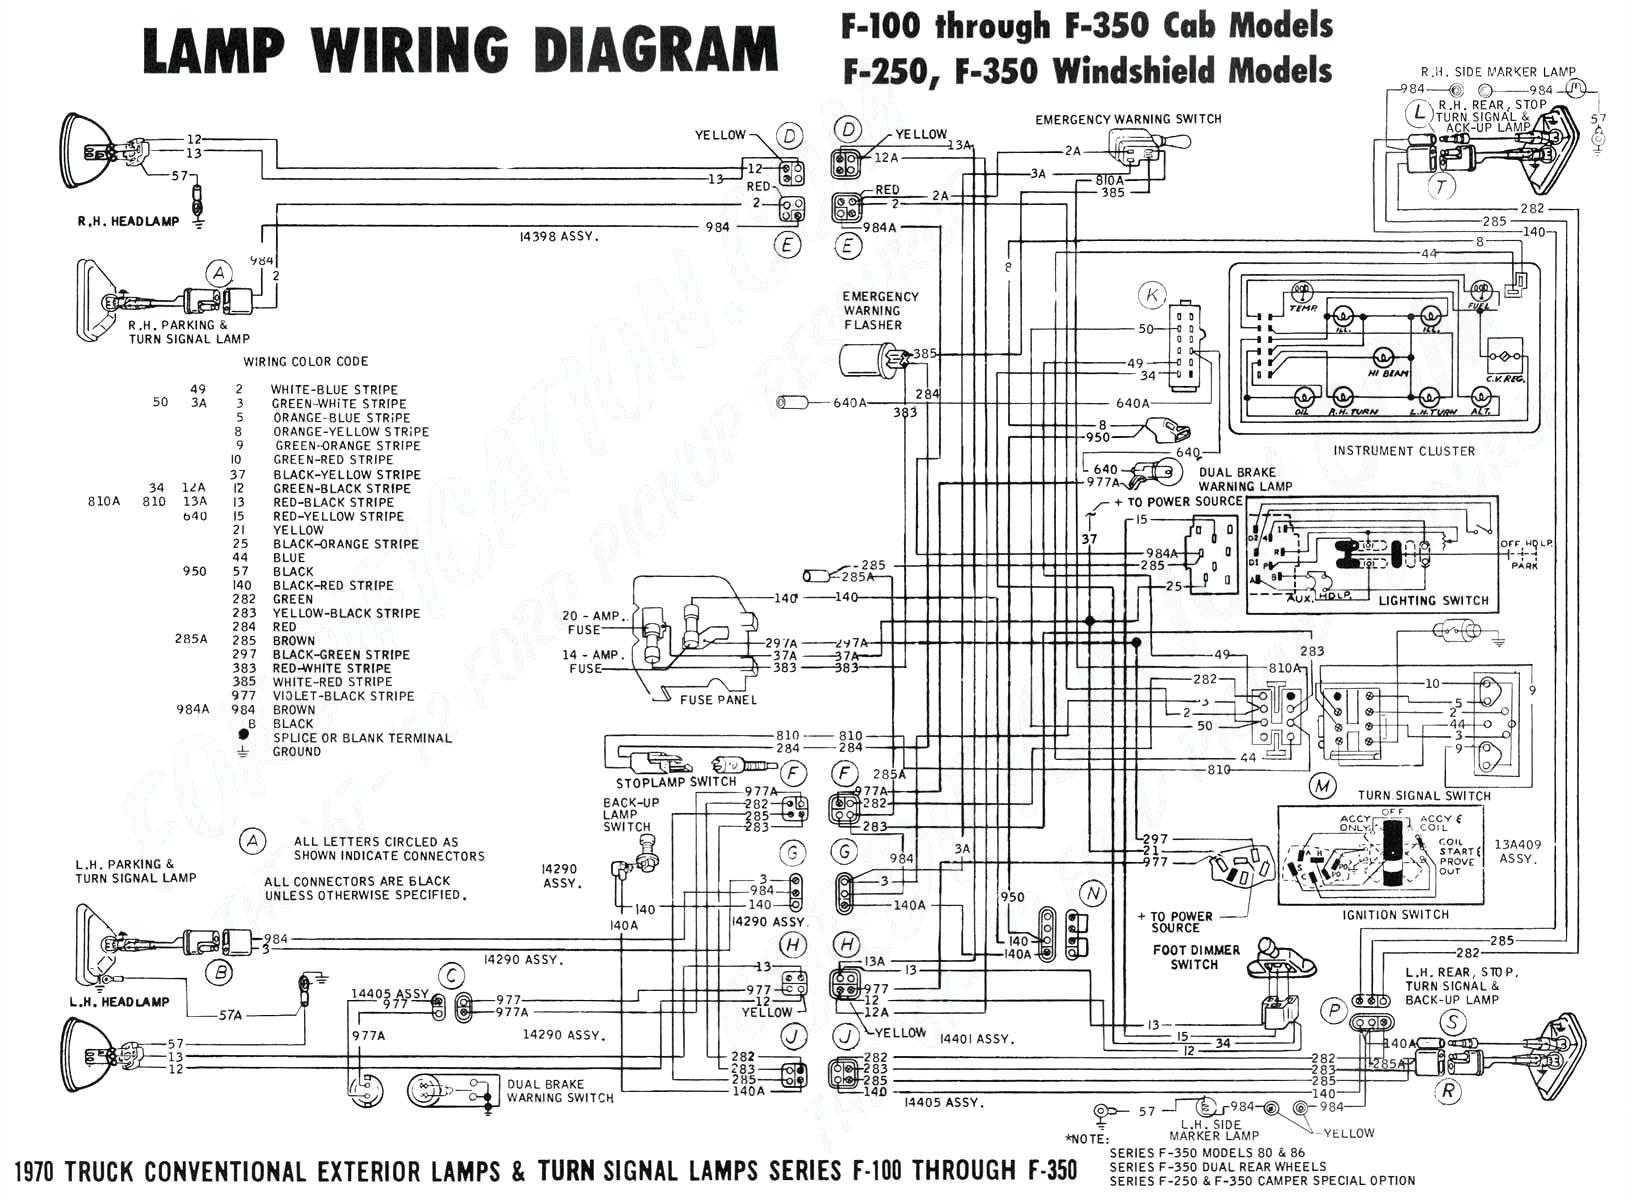 2000 eclipse fuse diagram wiring diagram used 00 eclipse fuse diagram wiring schematic